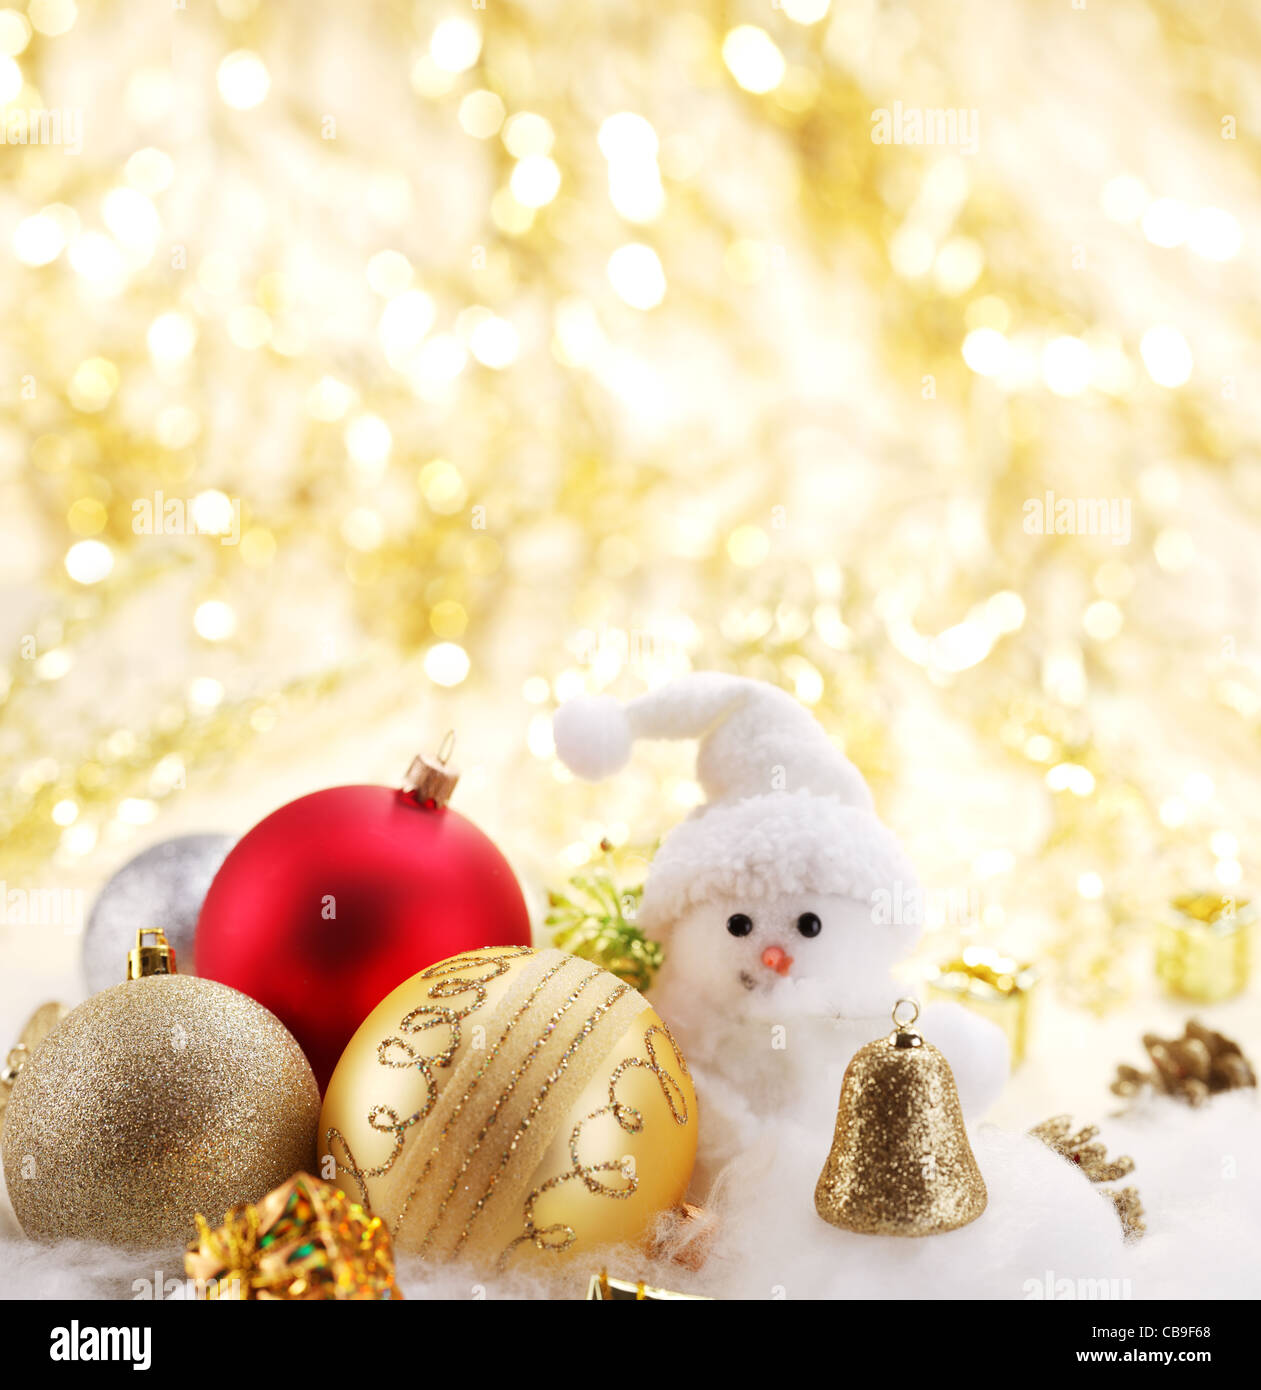 Christmas balls with a snowman Stock Photo